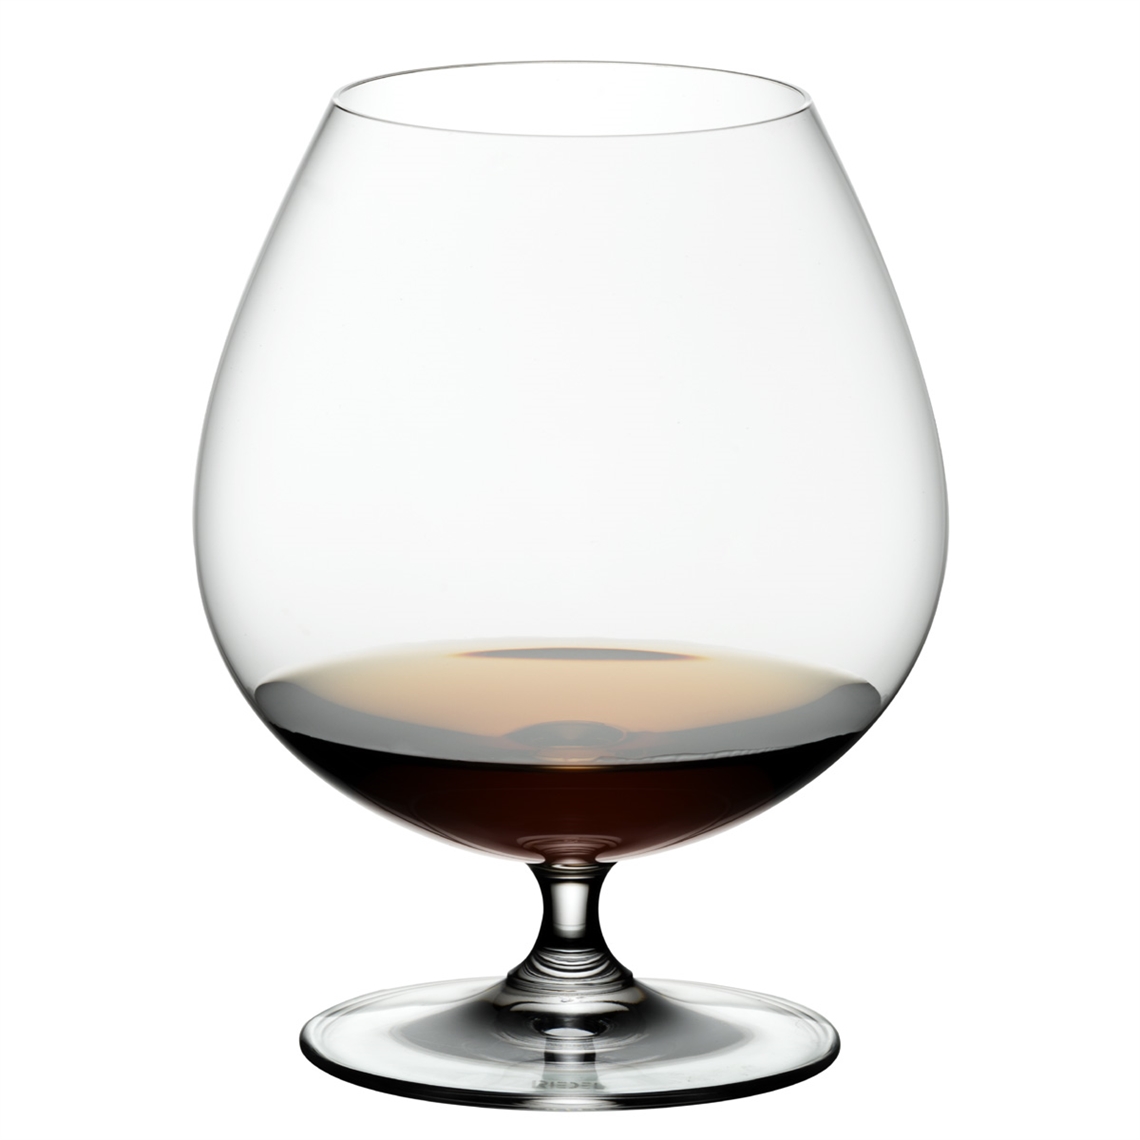 View more schott zwiesel tritan crystal glass from our Spirit Glasses range